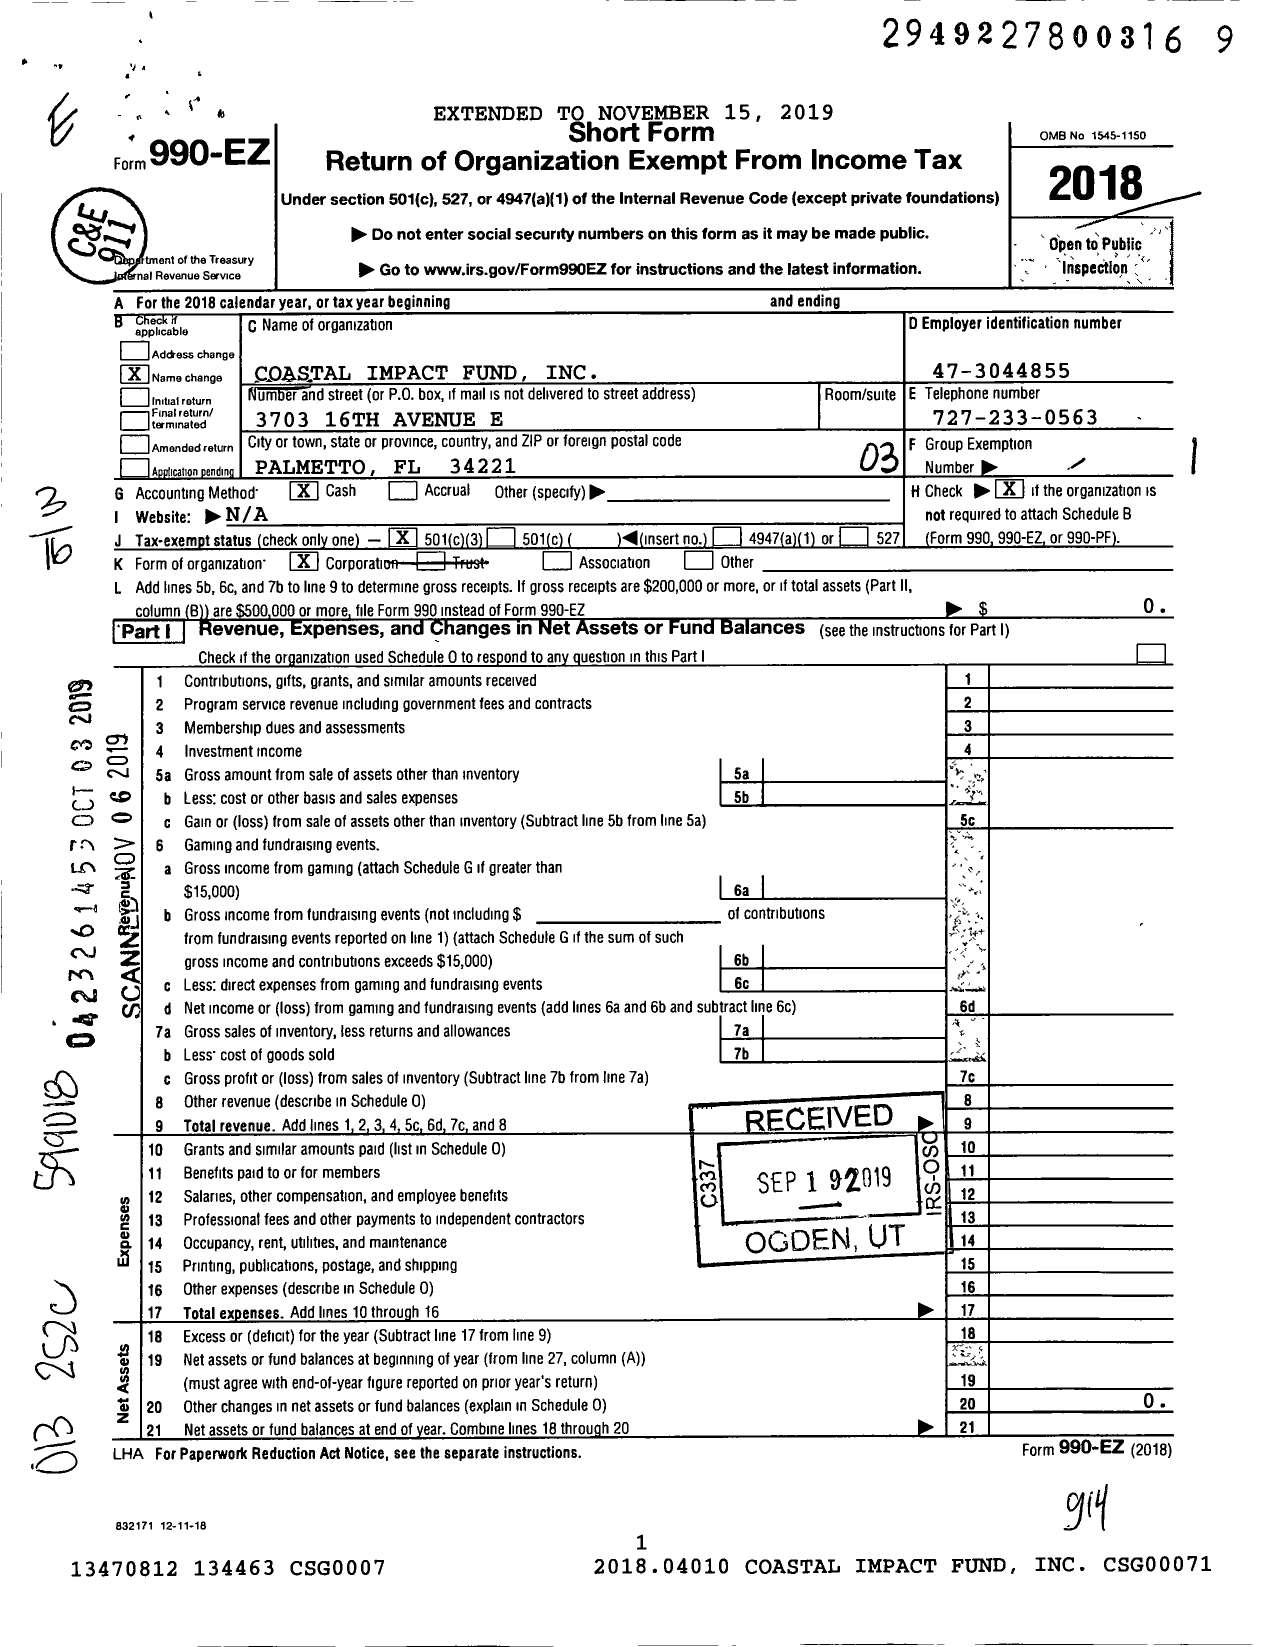 Image of first page of 2018 Form 990EZ for Coastal Impact Fund